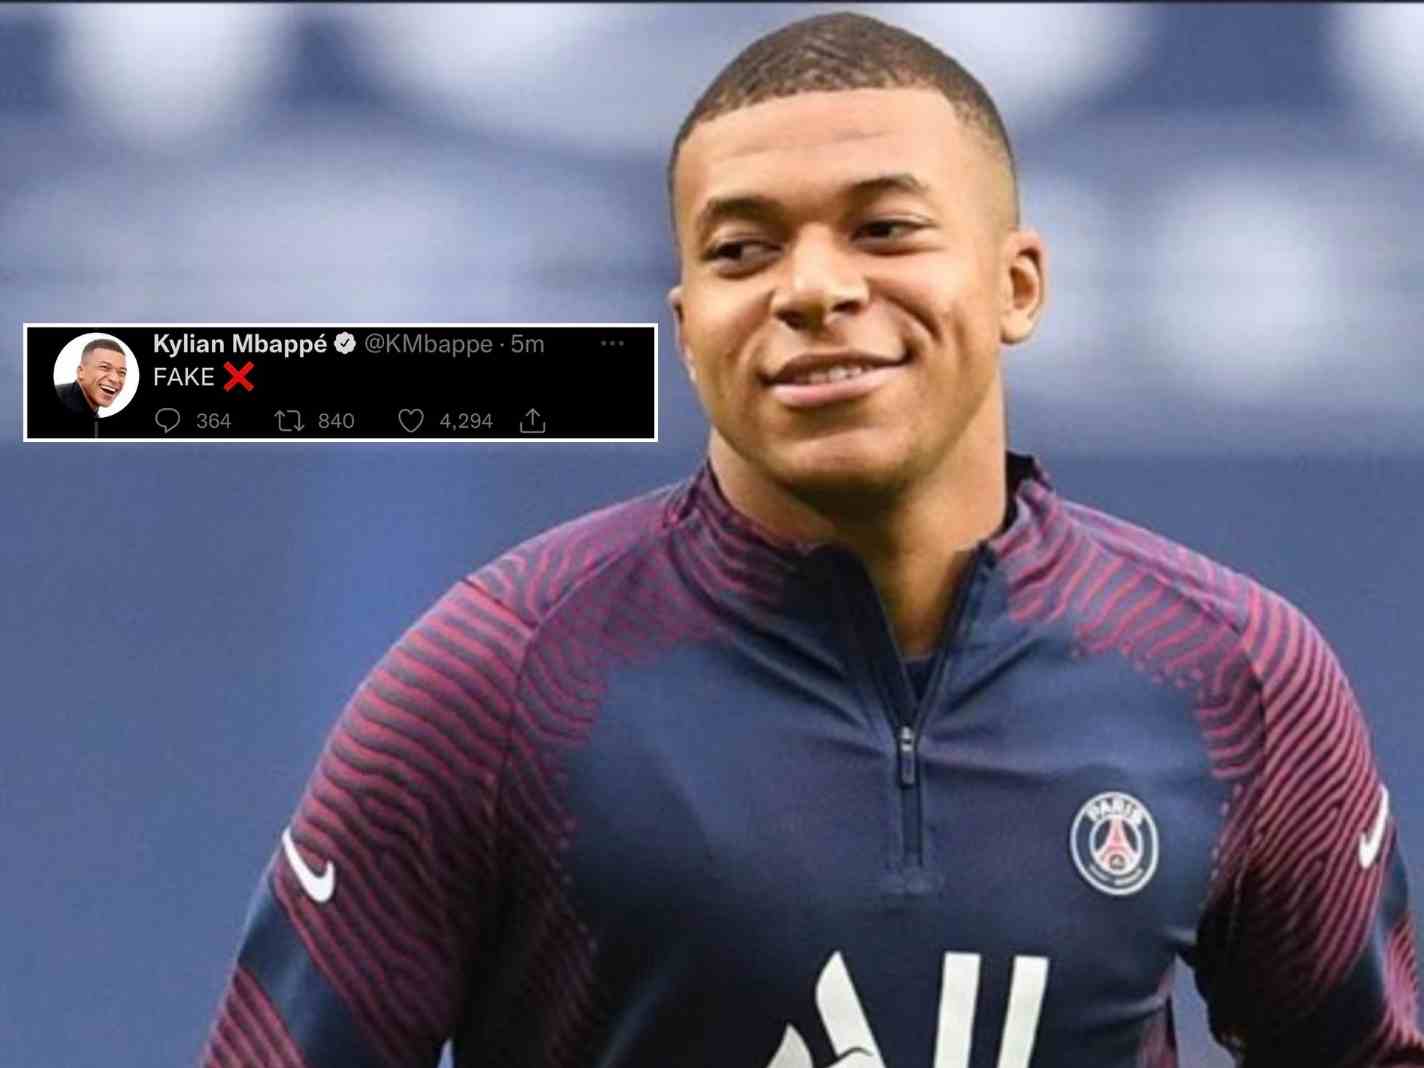 A photo of Kylian Mbappe along with a screenshot of his tweet which read just FAKE on a tweet from Sportbible.